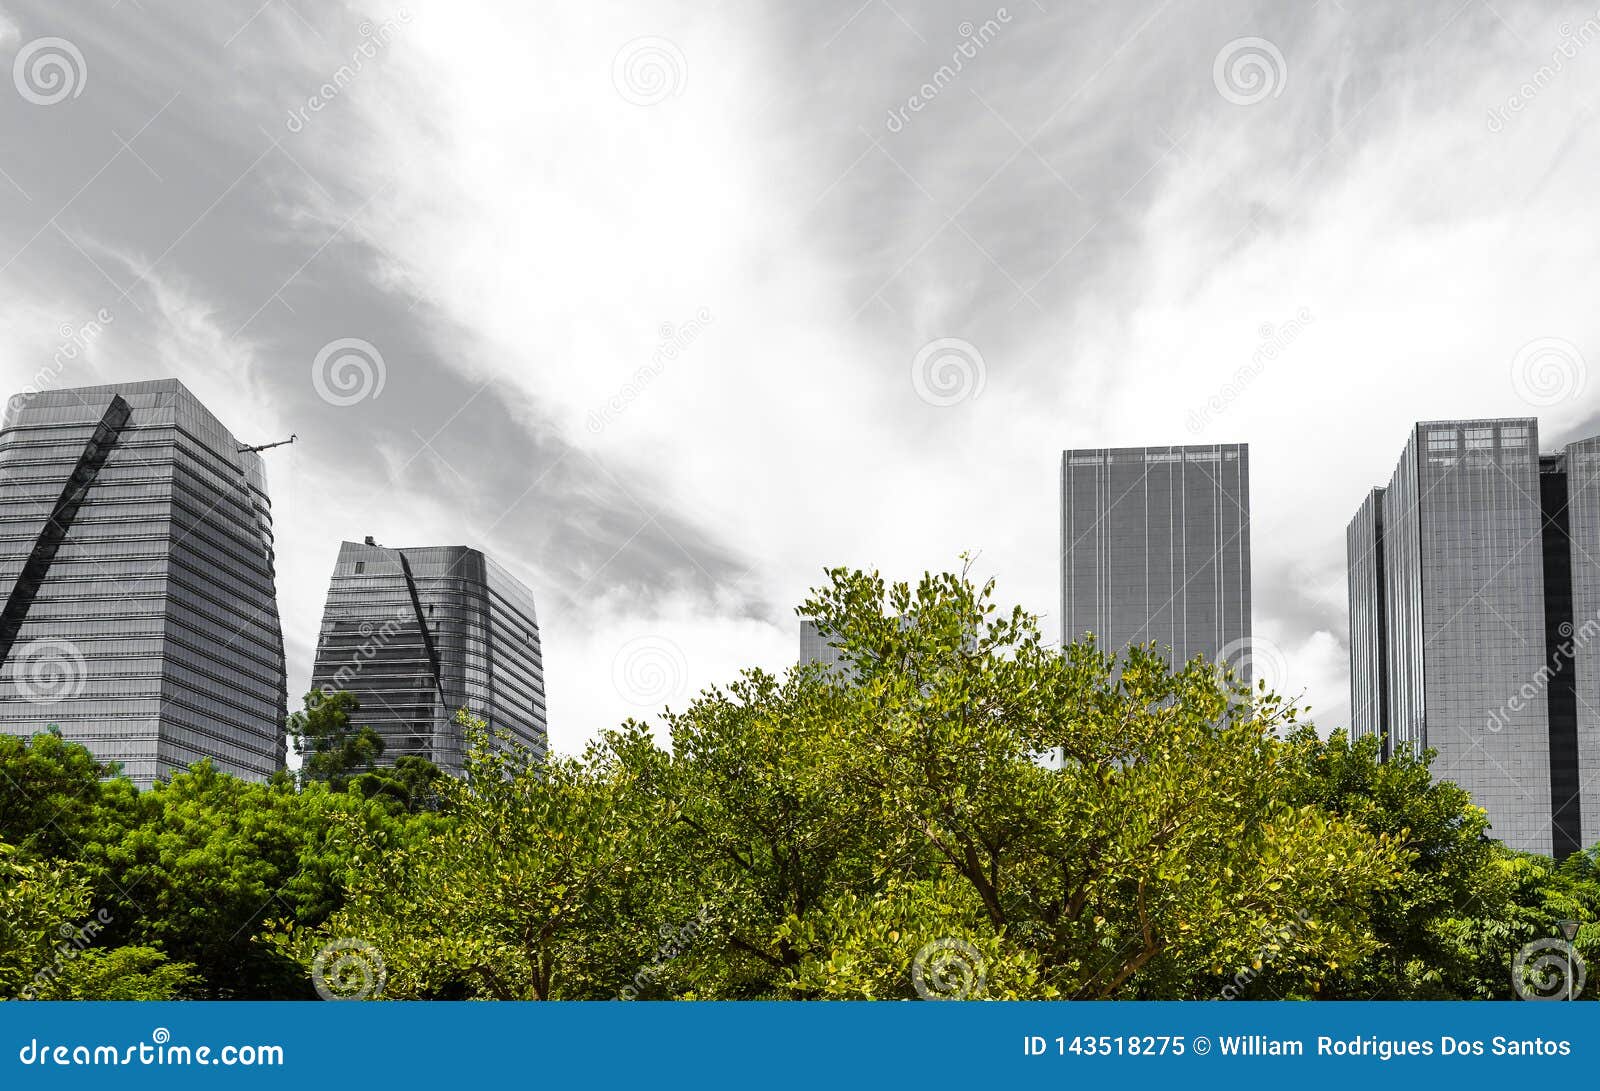 Contrast Nature and Civilization Stock Image - Image of district, park: 143518275